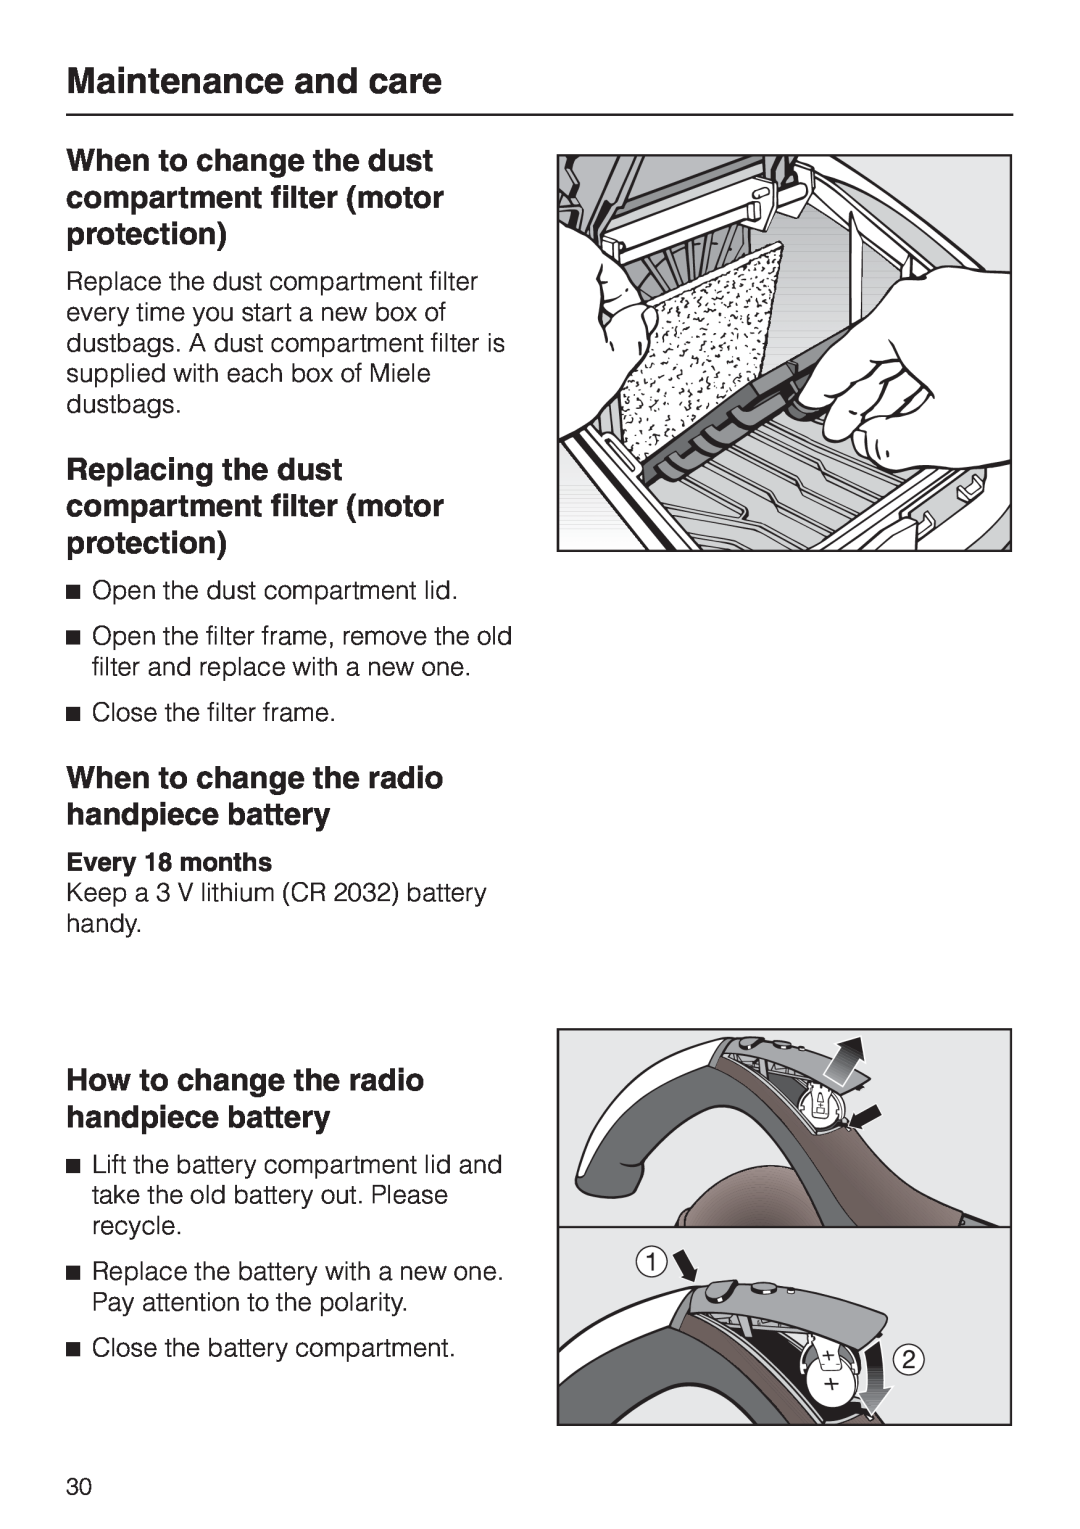 Miele S 4000 Maintenance and care, When to change the radio handpiece battery, How to change the radio handpiece battery 